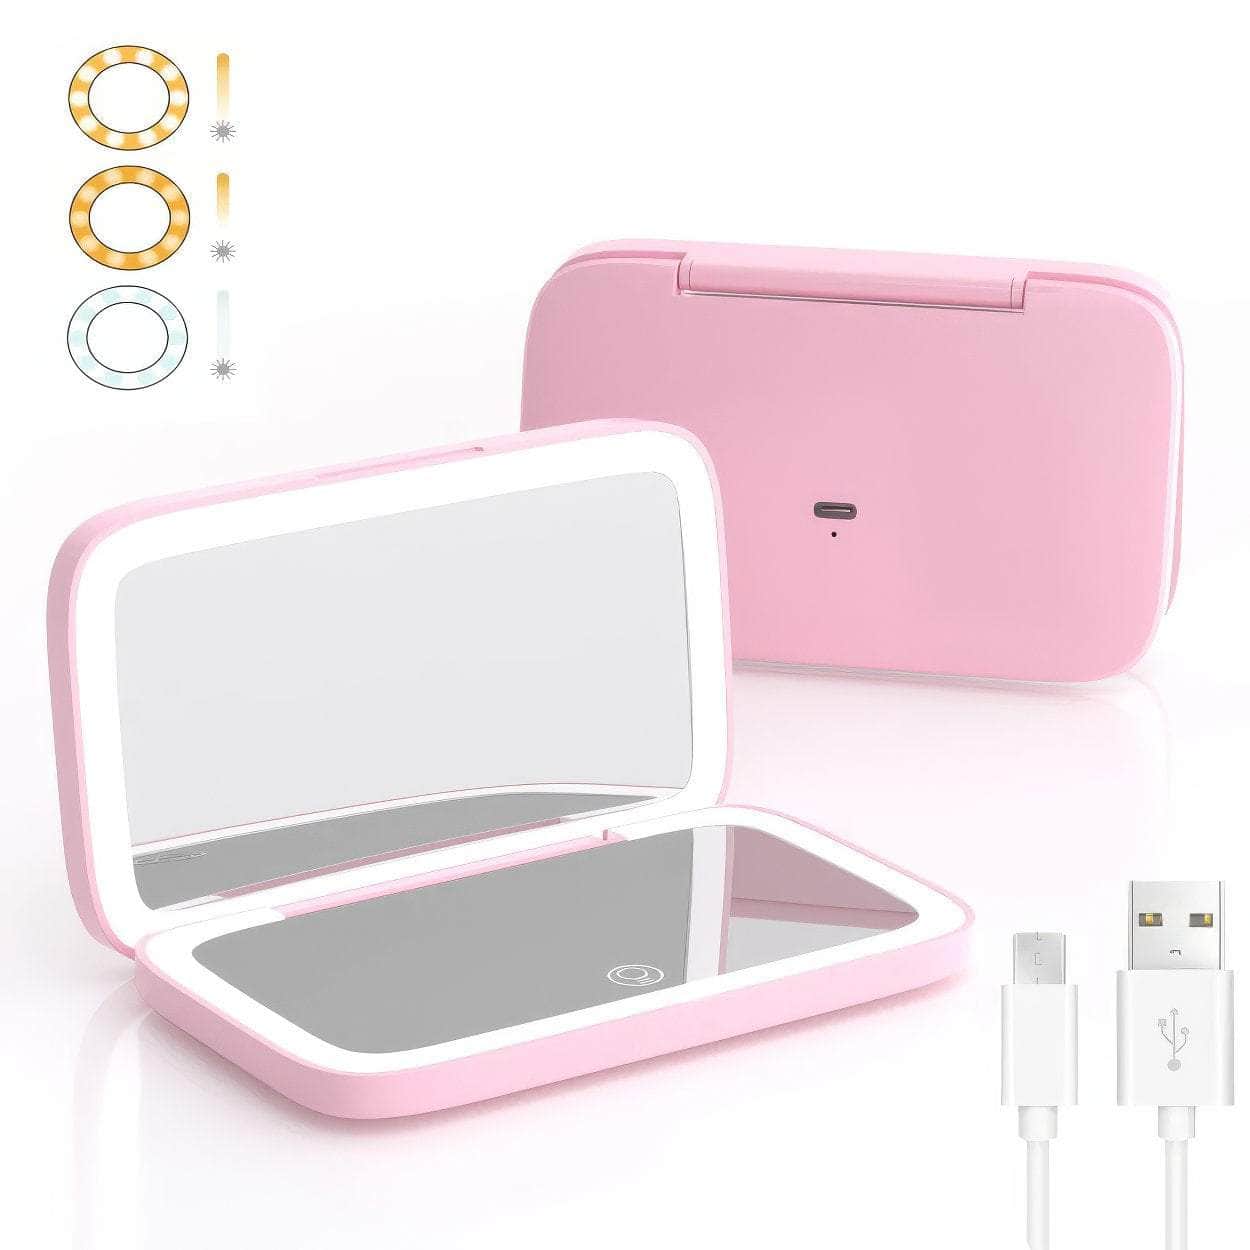 Rechargeable LED Makeup Mirror with 5X Magnification, Compact Pocket Travel Design, Dual-Sided for Aesthetic Vanity, Cosmetic Tools 1PCS Pink